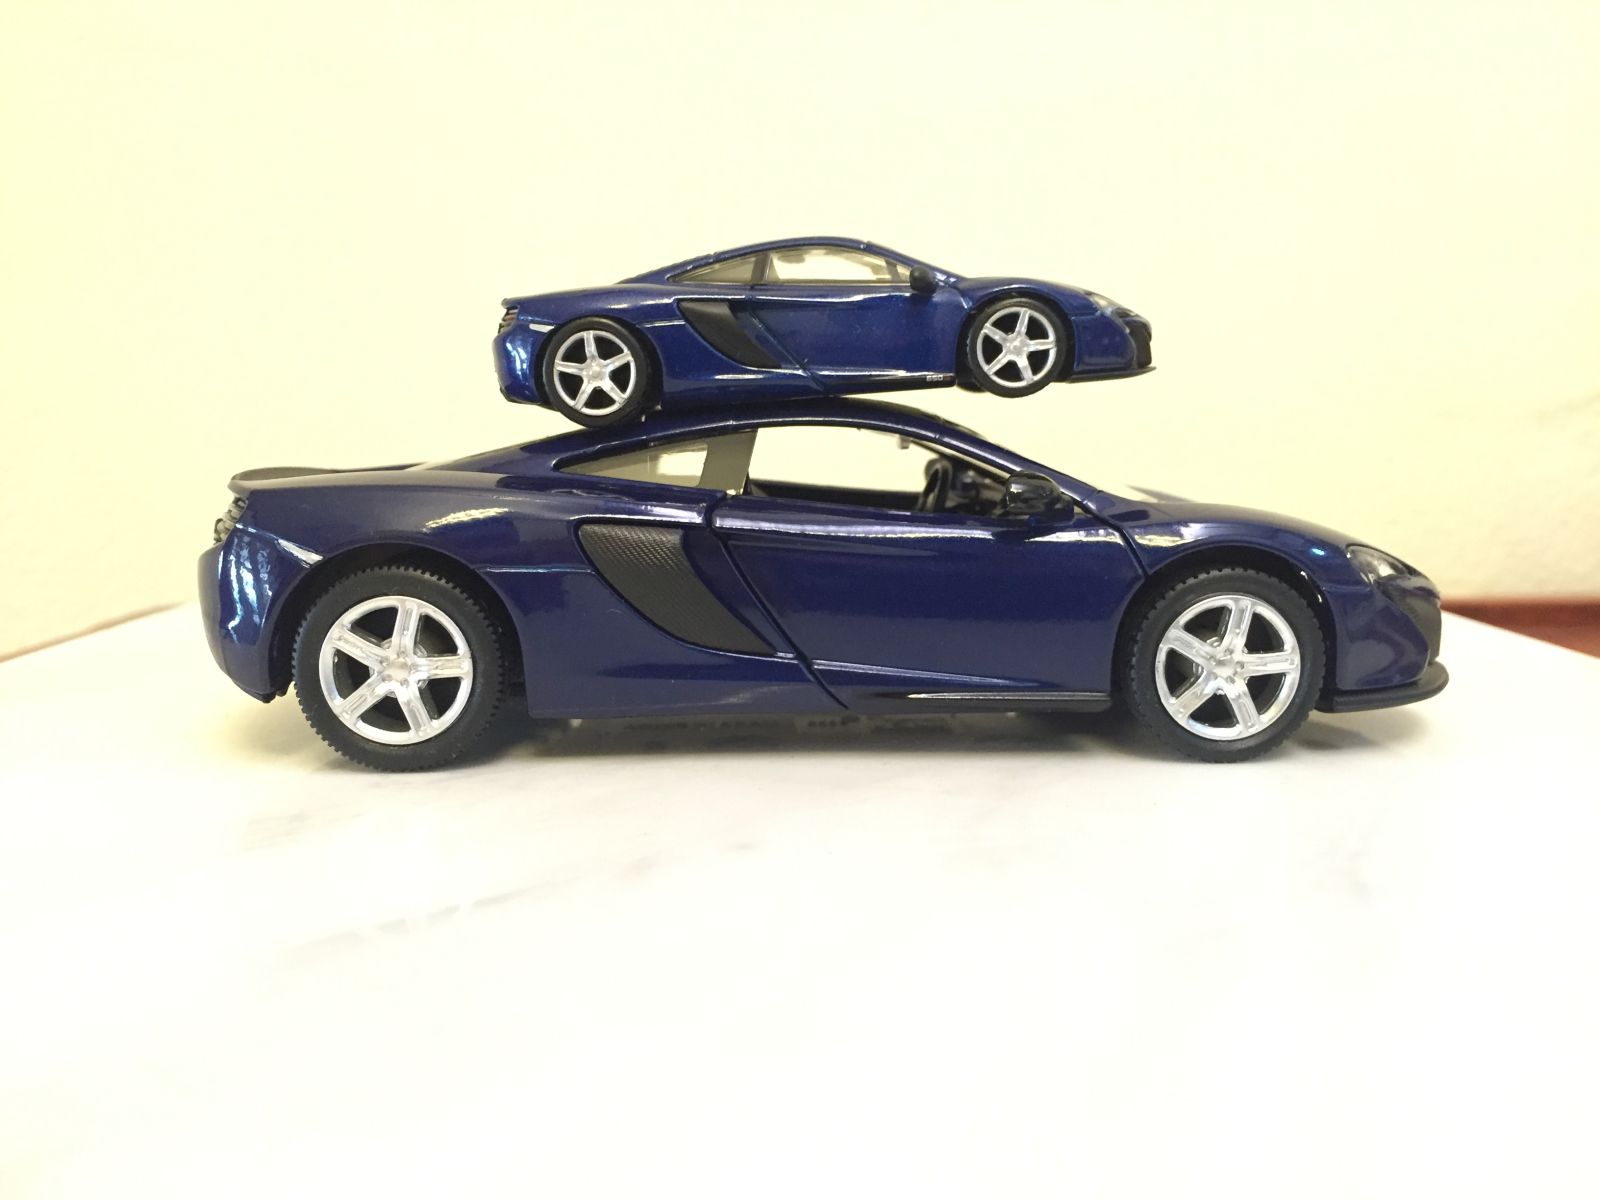 Illustration for article titled Macca Monday- McLaren 650S small and regular size